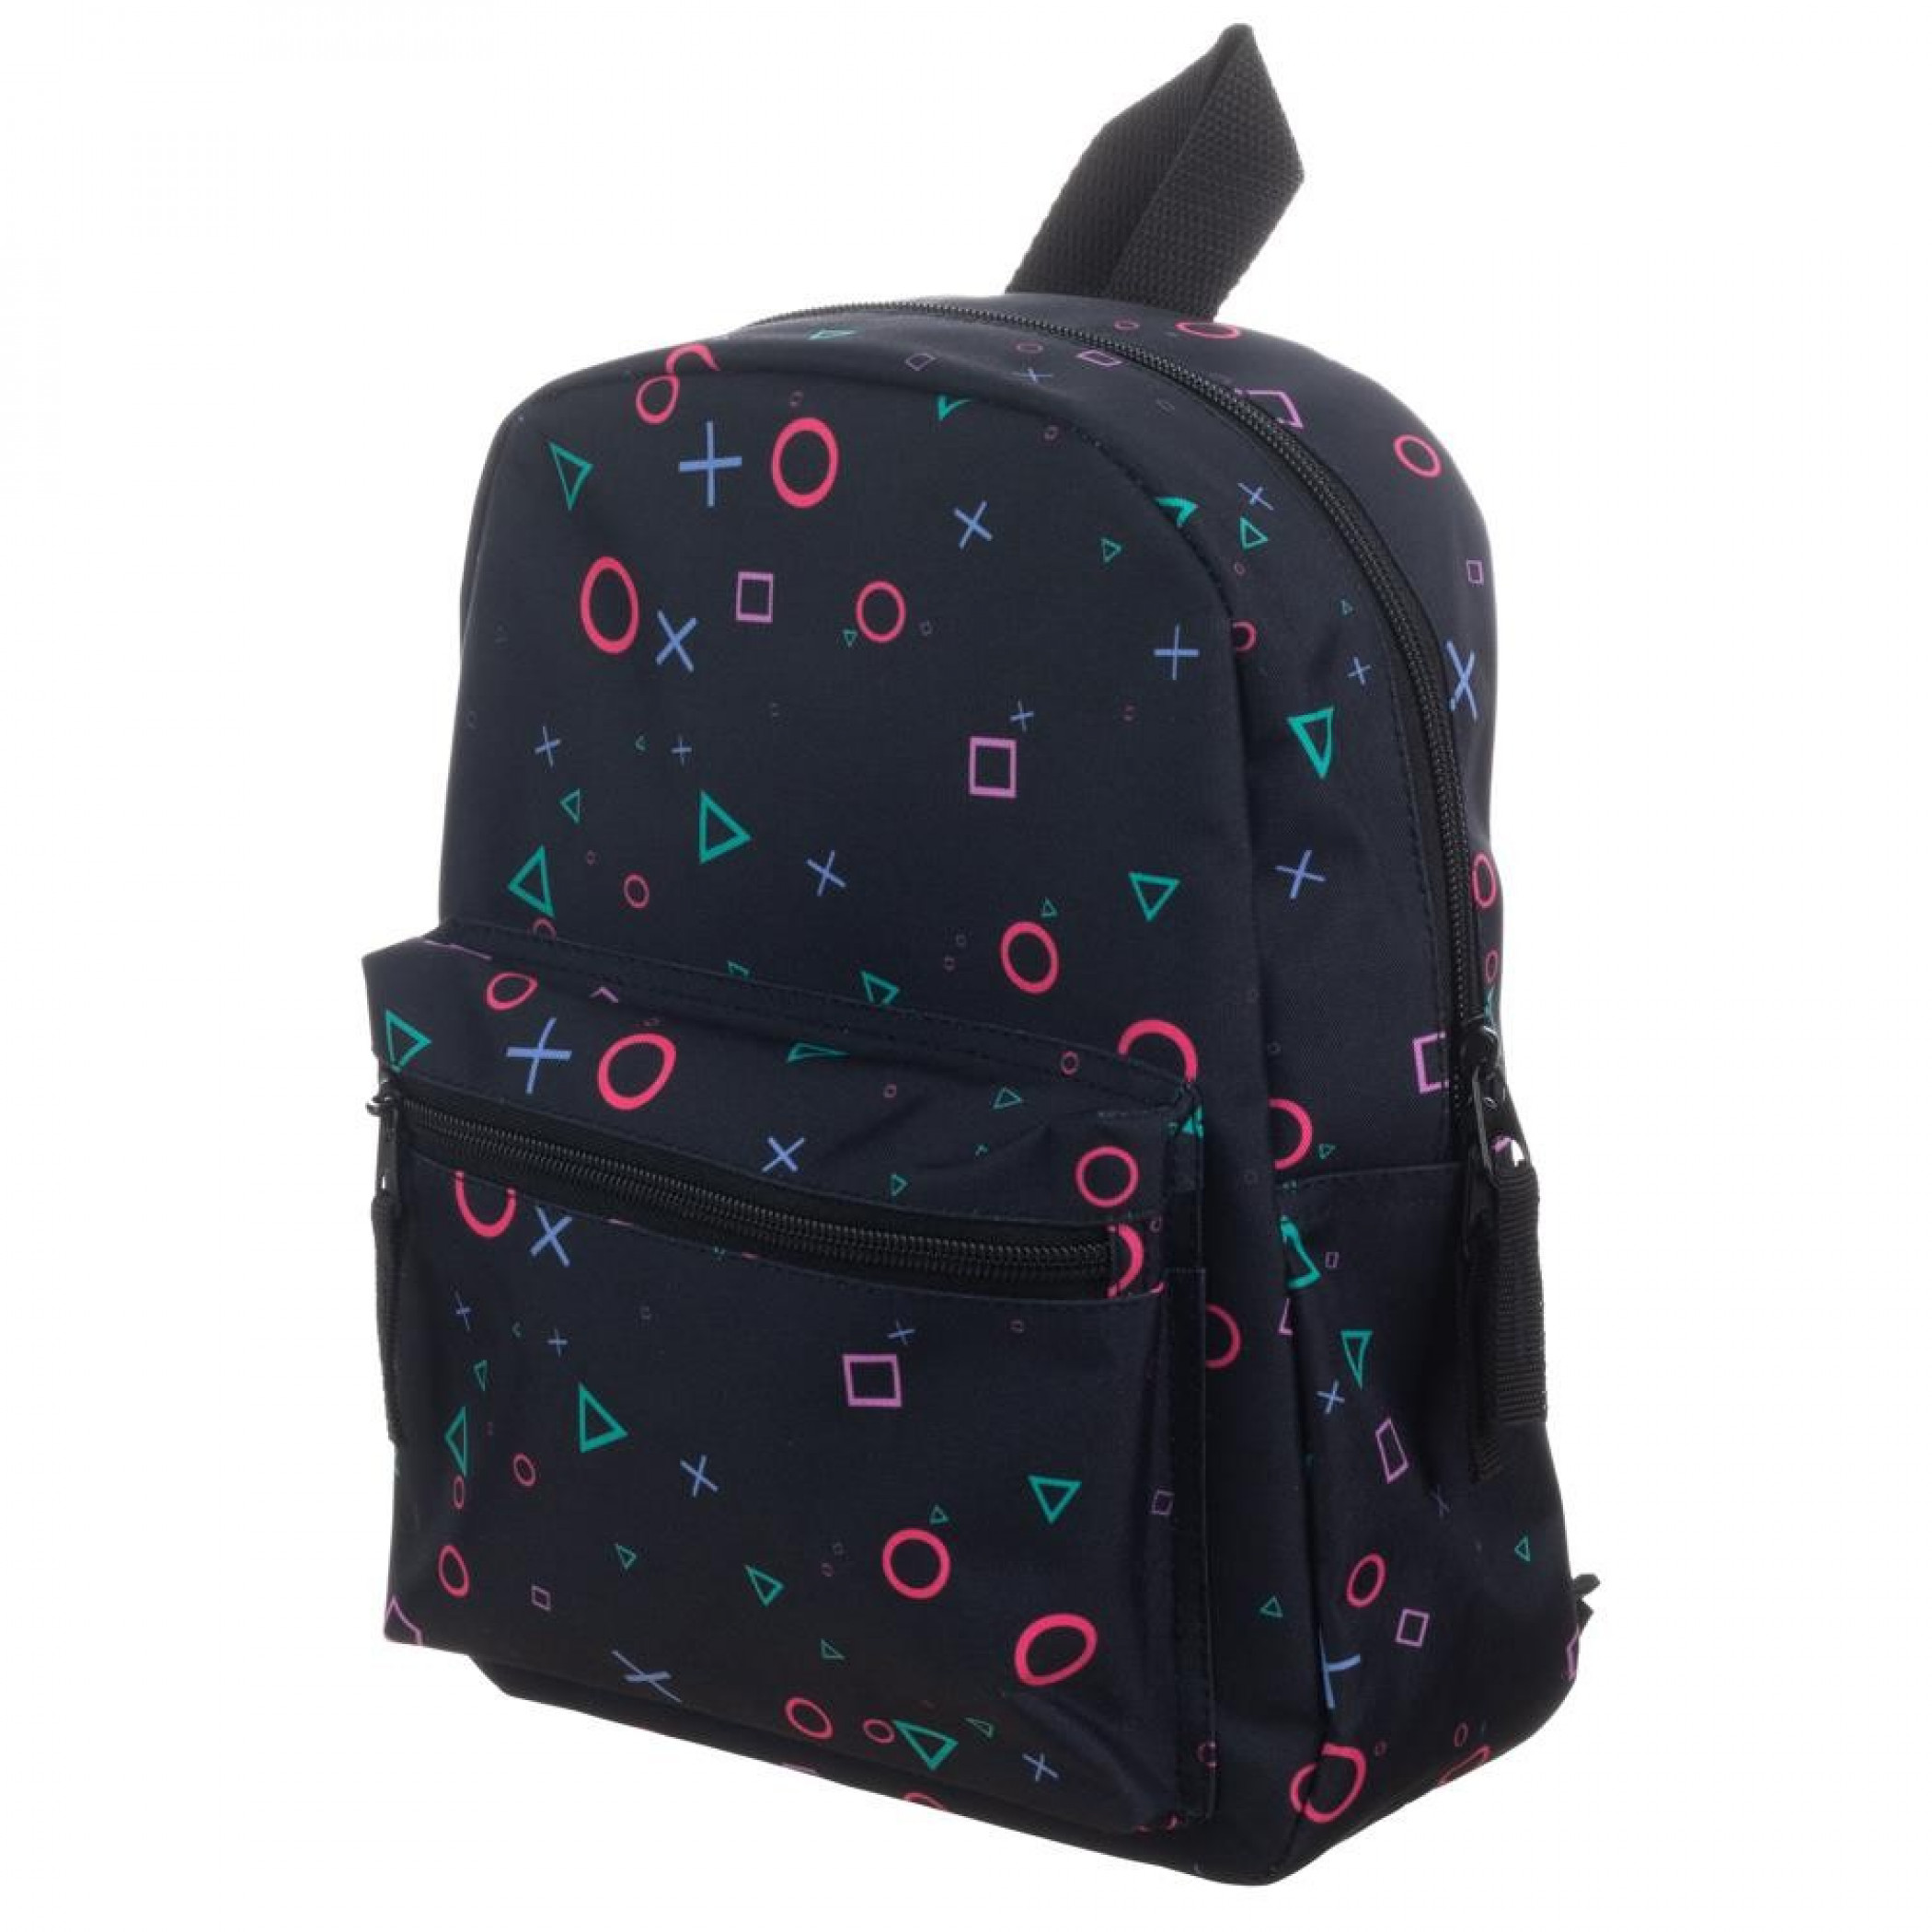 PlayStation Buttons All Over Sublimated Print Mini Backpack